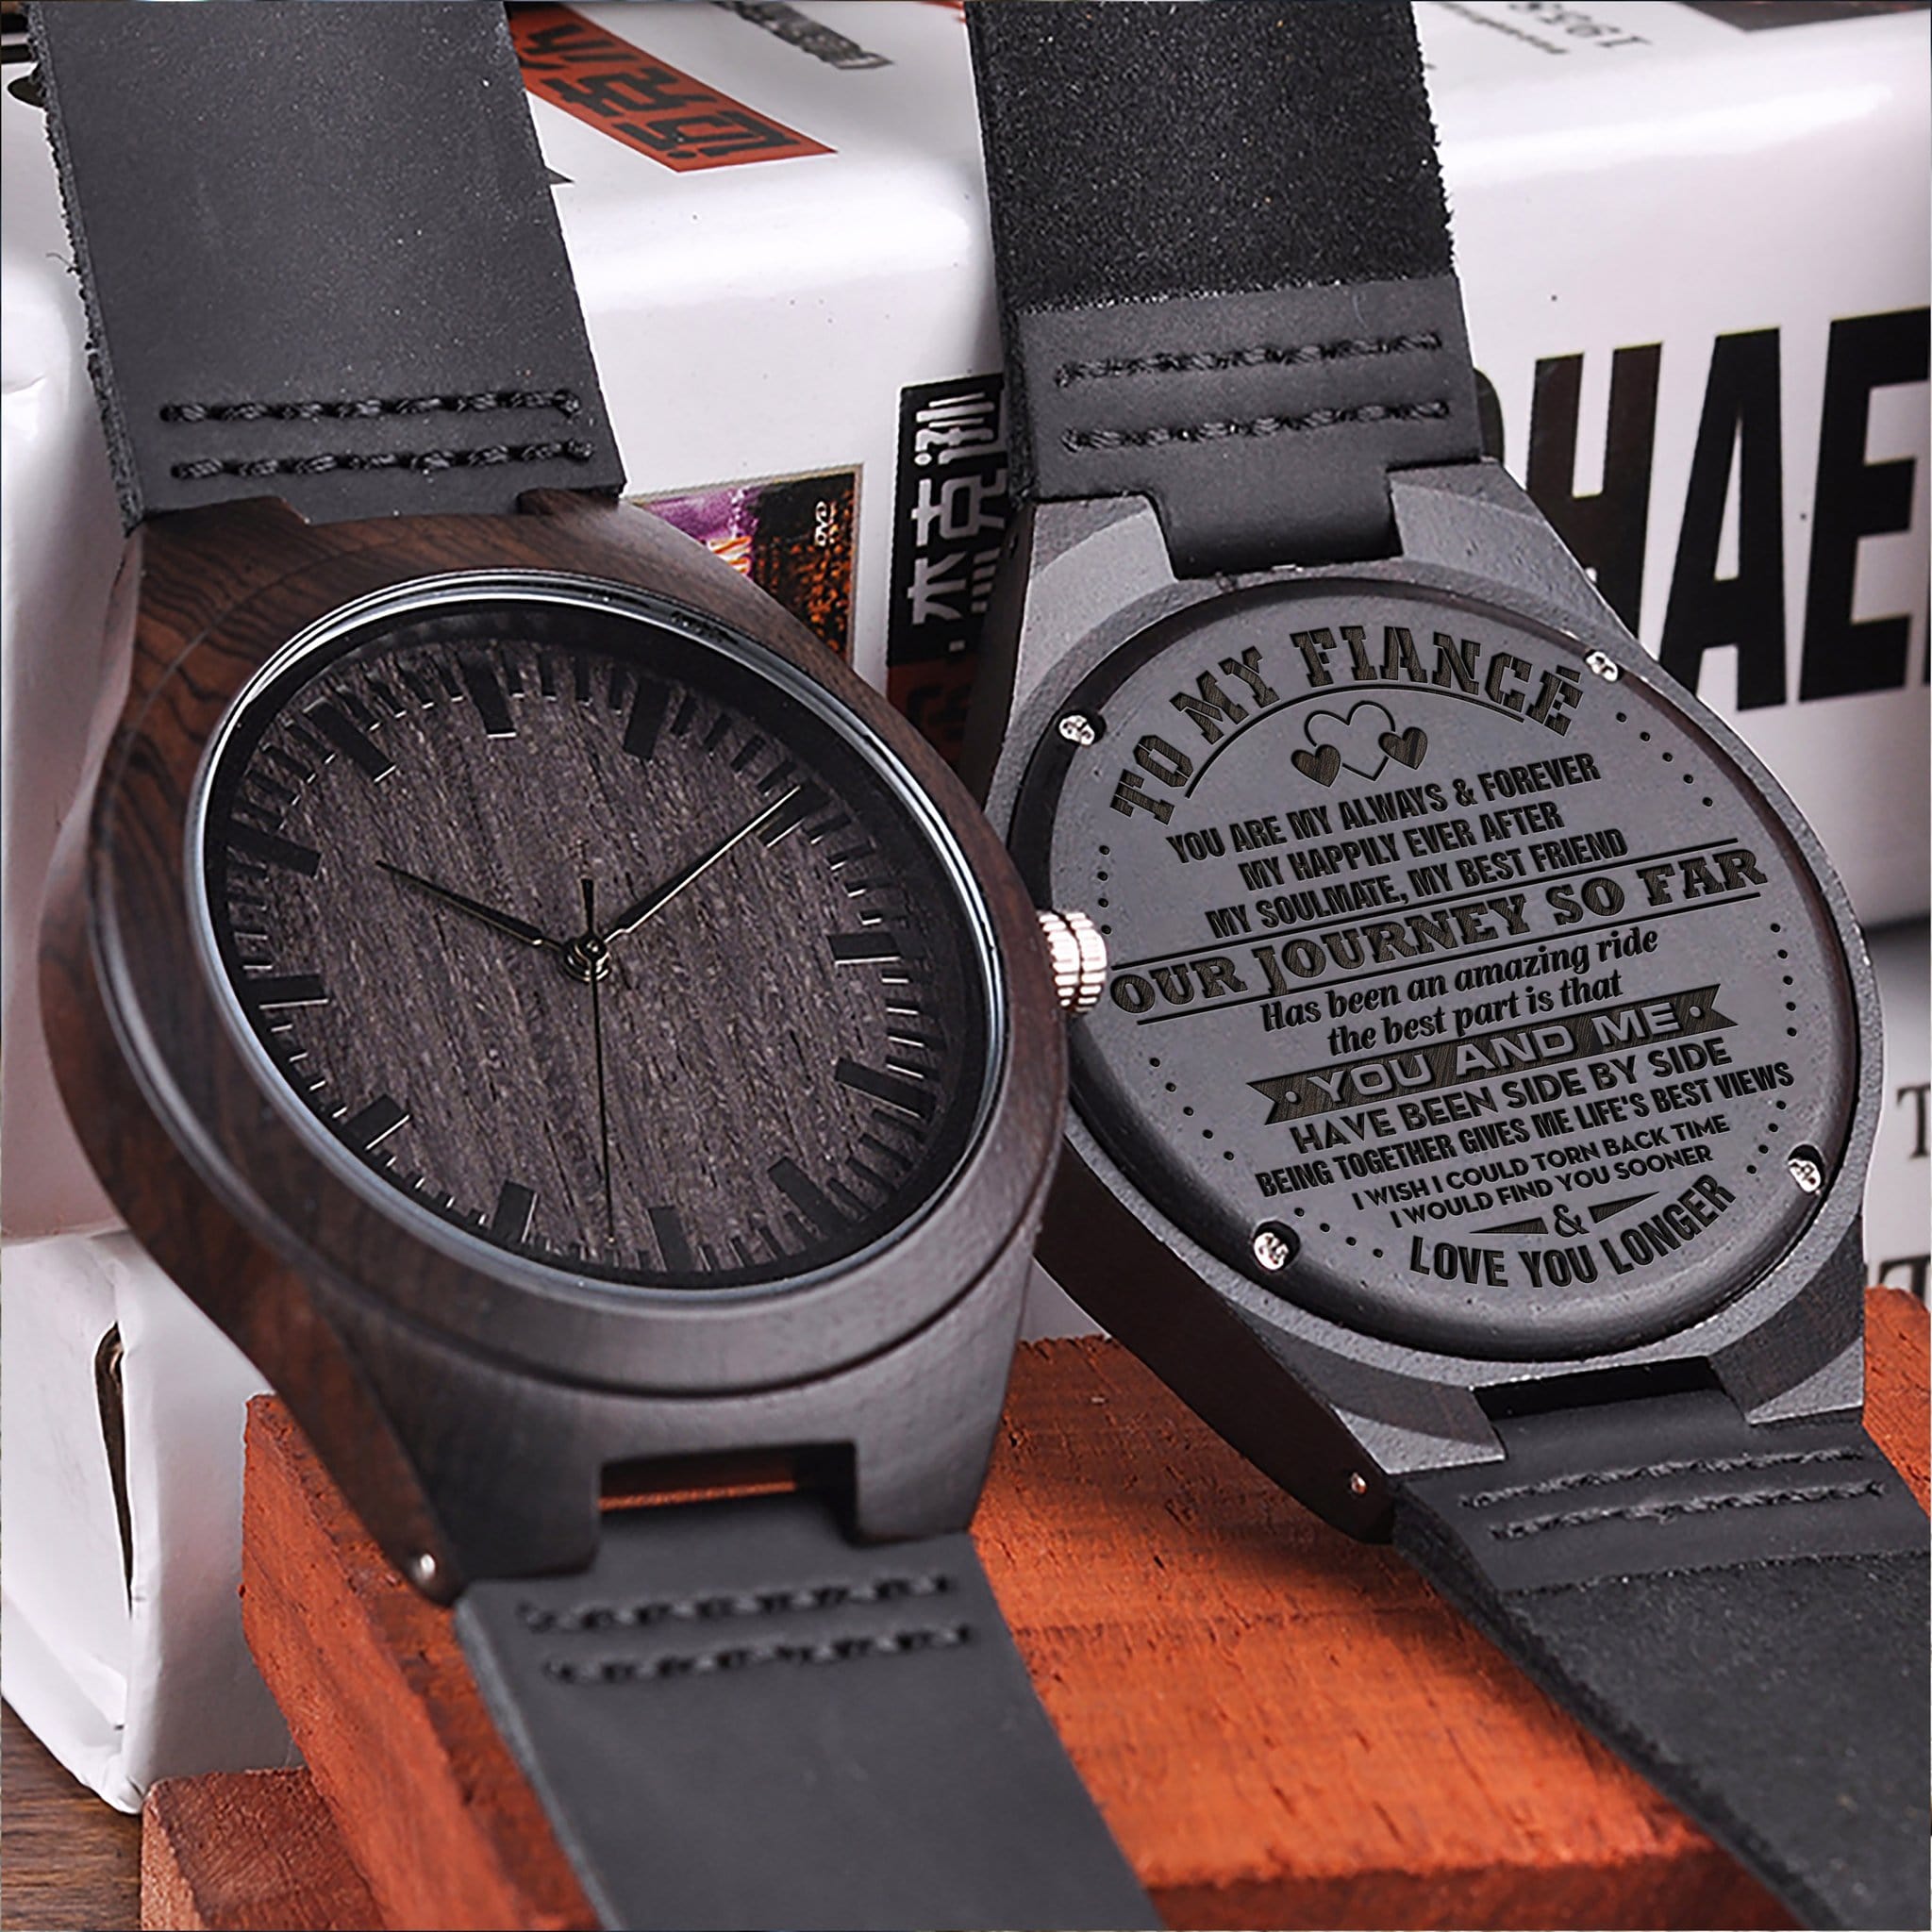 Watches To My Fiance - Love You Longer Engraved Wood Watch GiveMe-Gifts